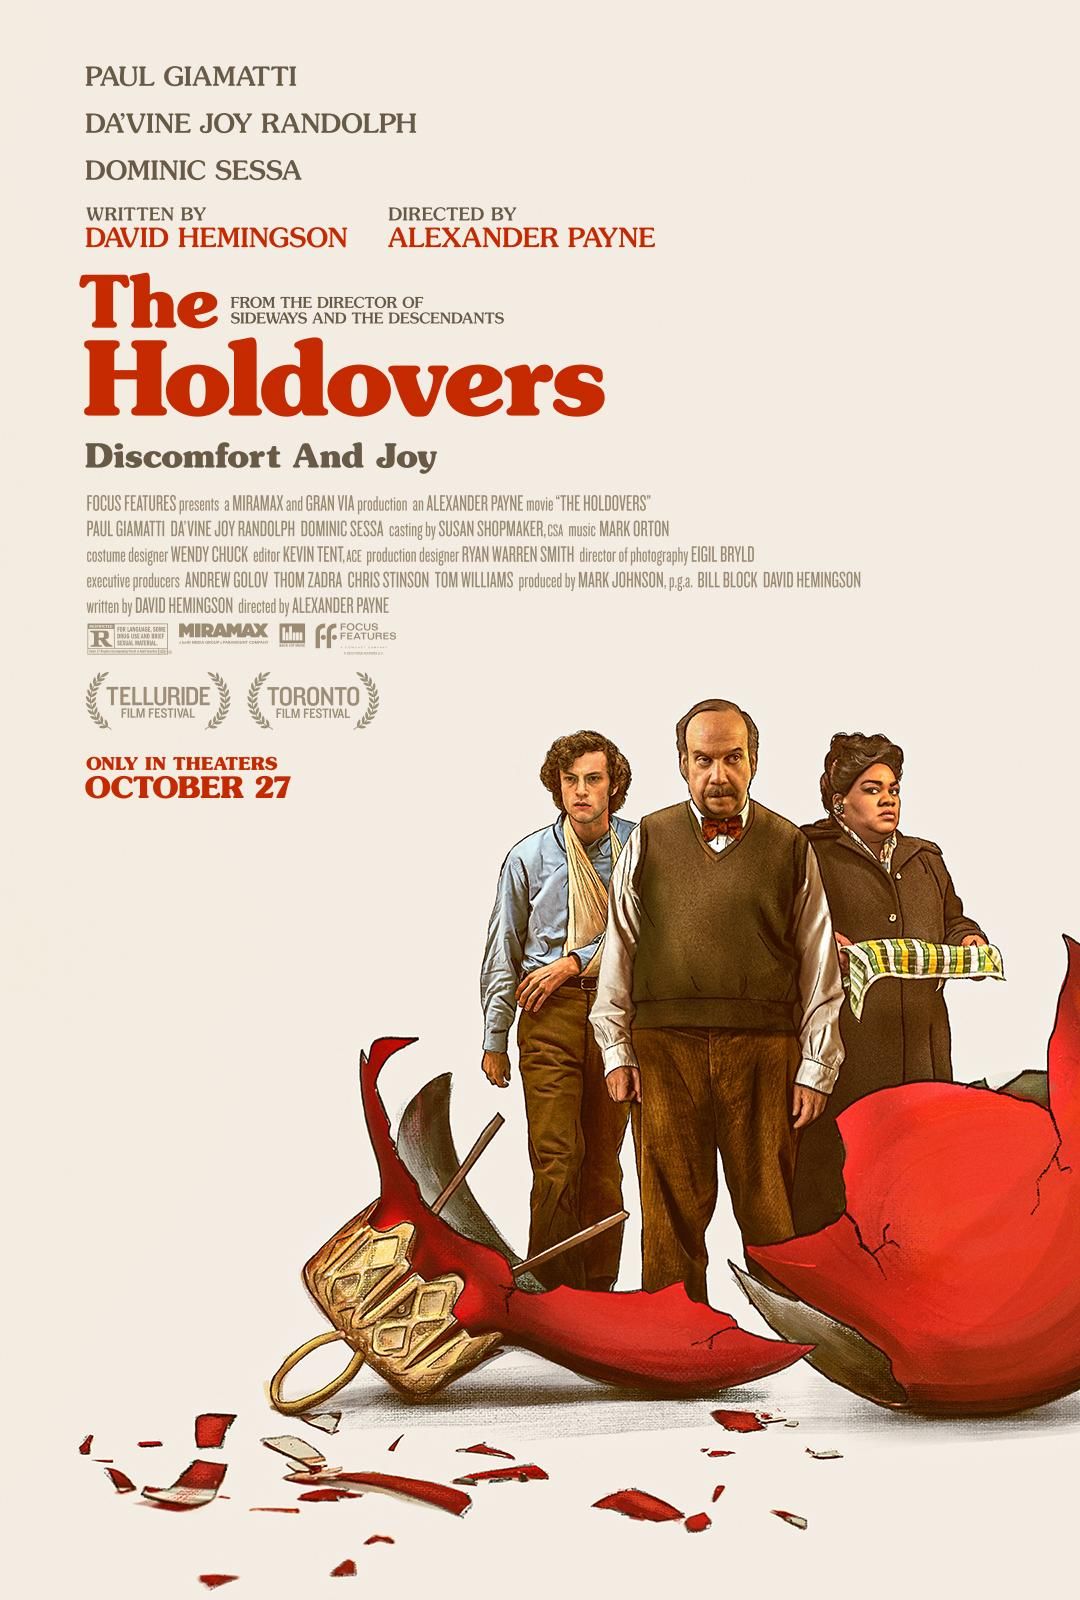 The Holdovers Film Poster